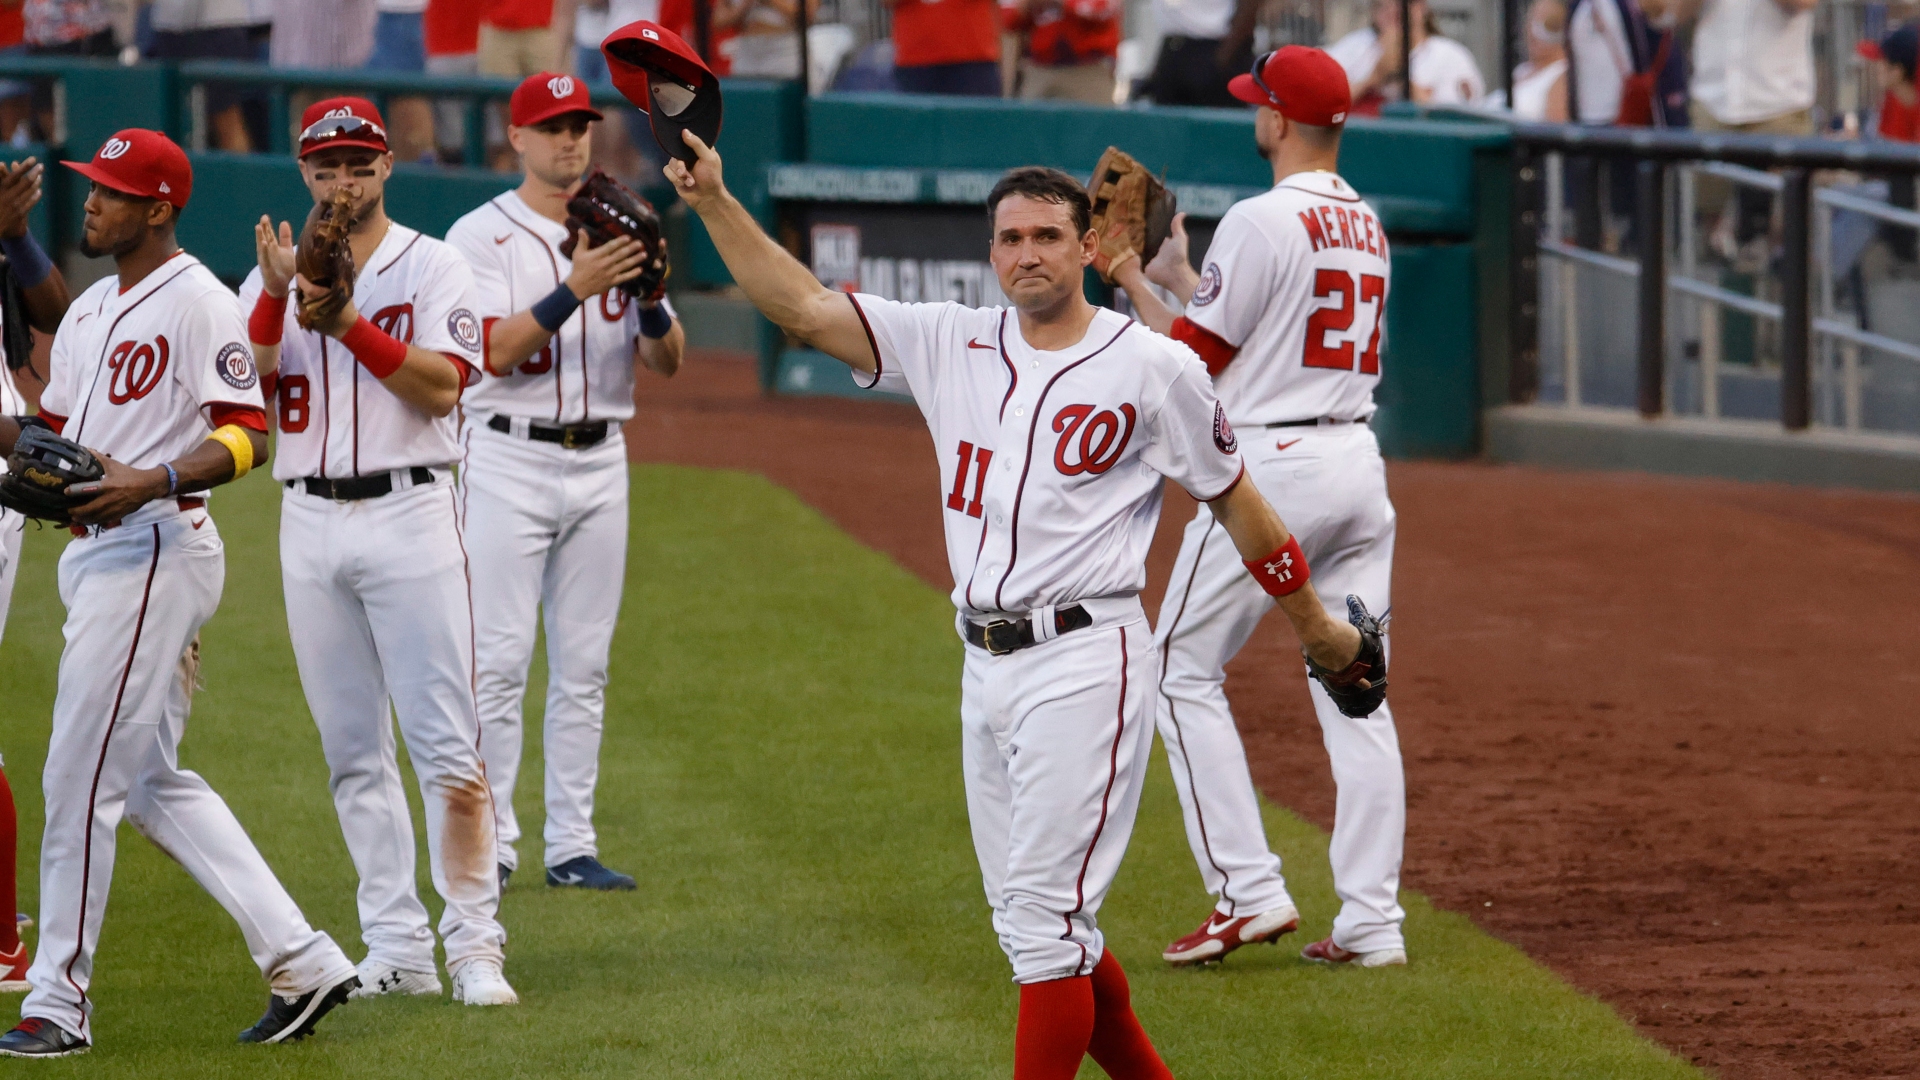 Ryan Zimmerman Plans to Play in 2022 But ‘No Decisions Either Way Yet'